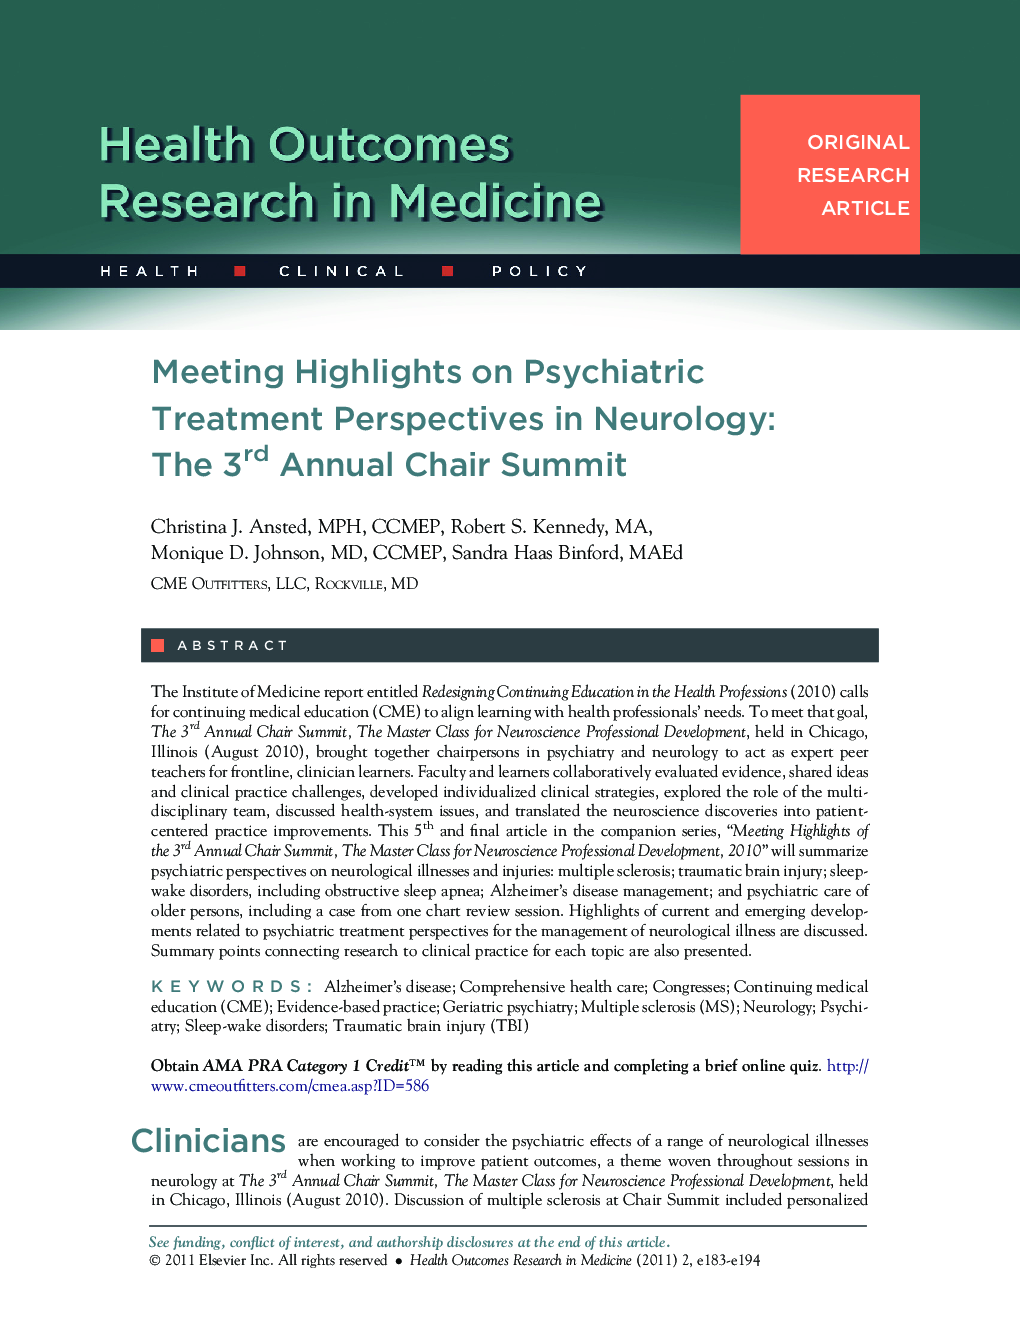 Meeting Highlights on Psychiatric Treatment Perspectives in Neurology: The 3rd Annual Chair Summit 